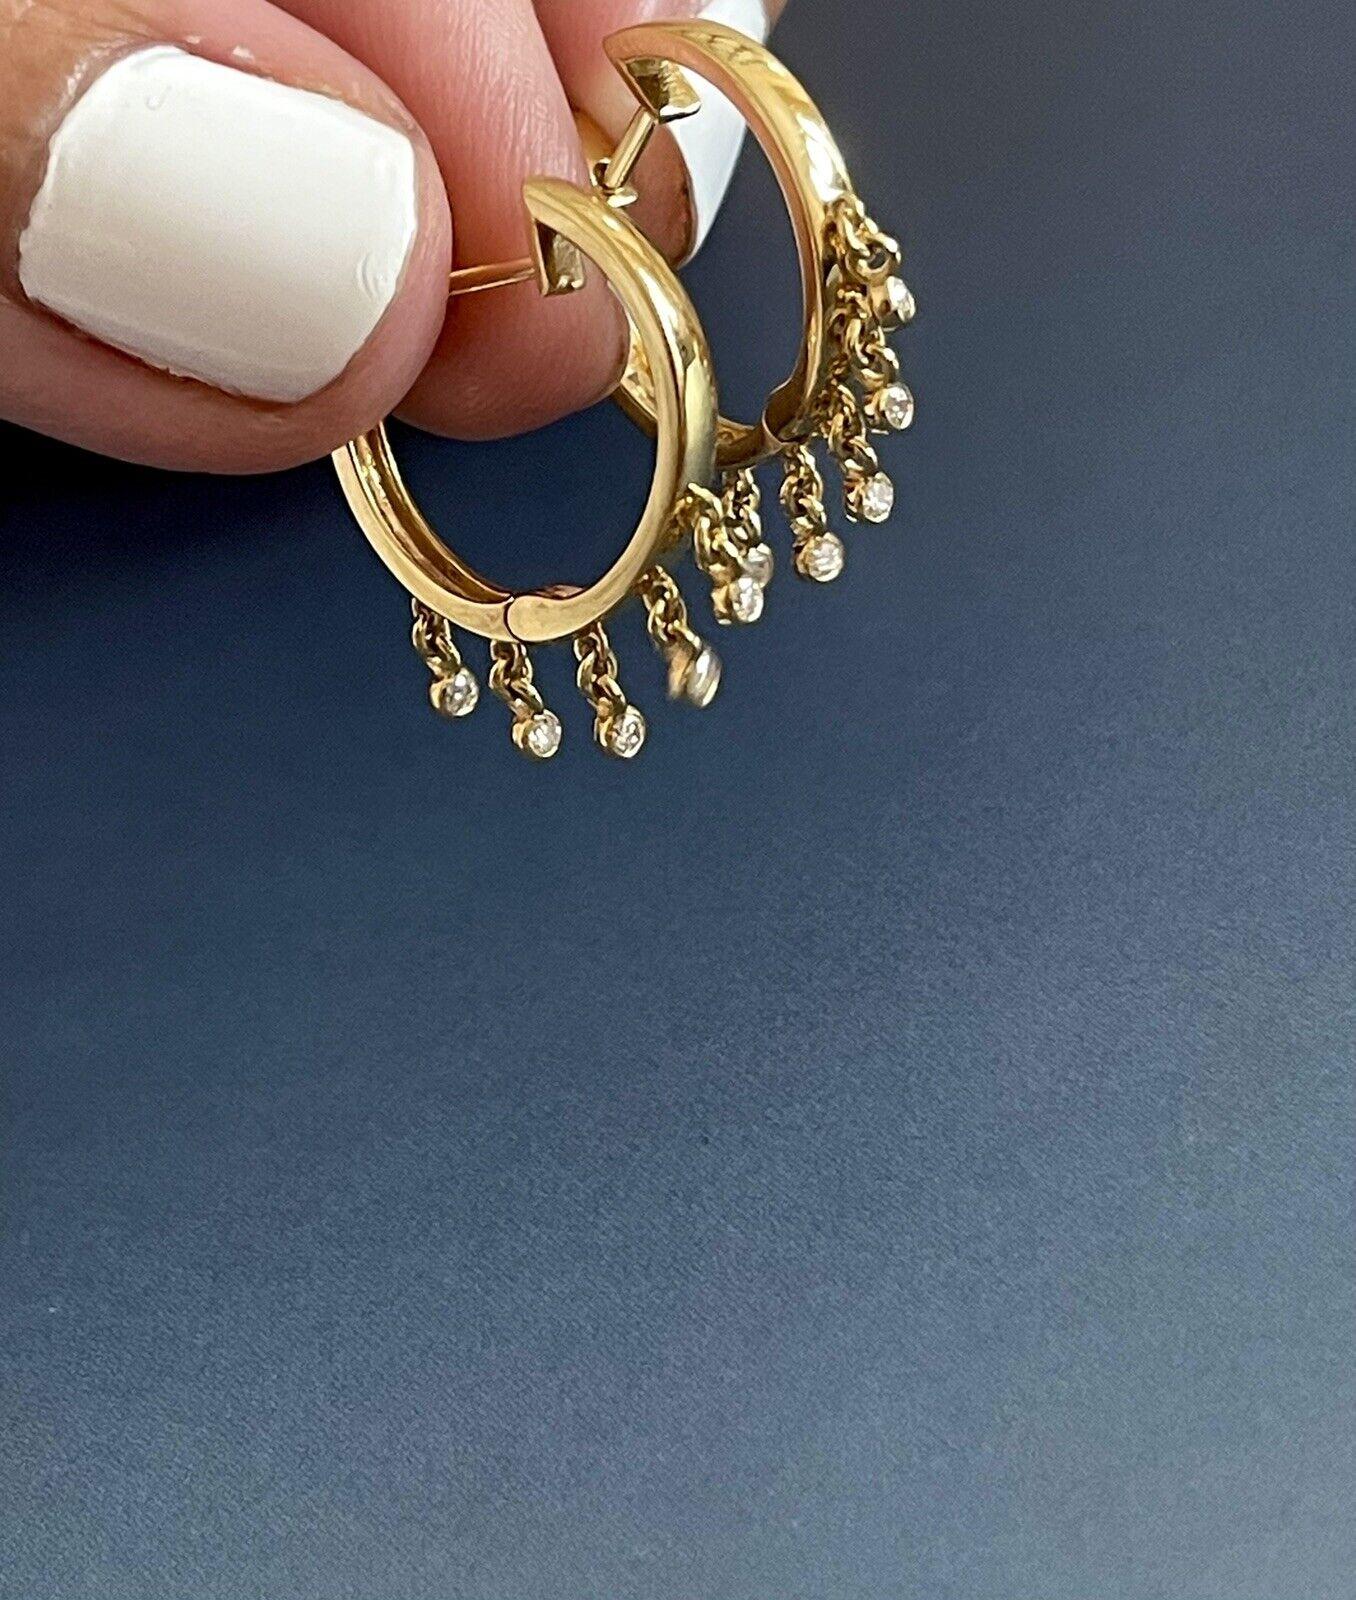 Cervin Blanc 18ct Yellow Gold Diamond Hoop Earrings 0.17ct Dewdrop Charms Hoops In New Condition For Sale In Ilford, GB